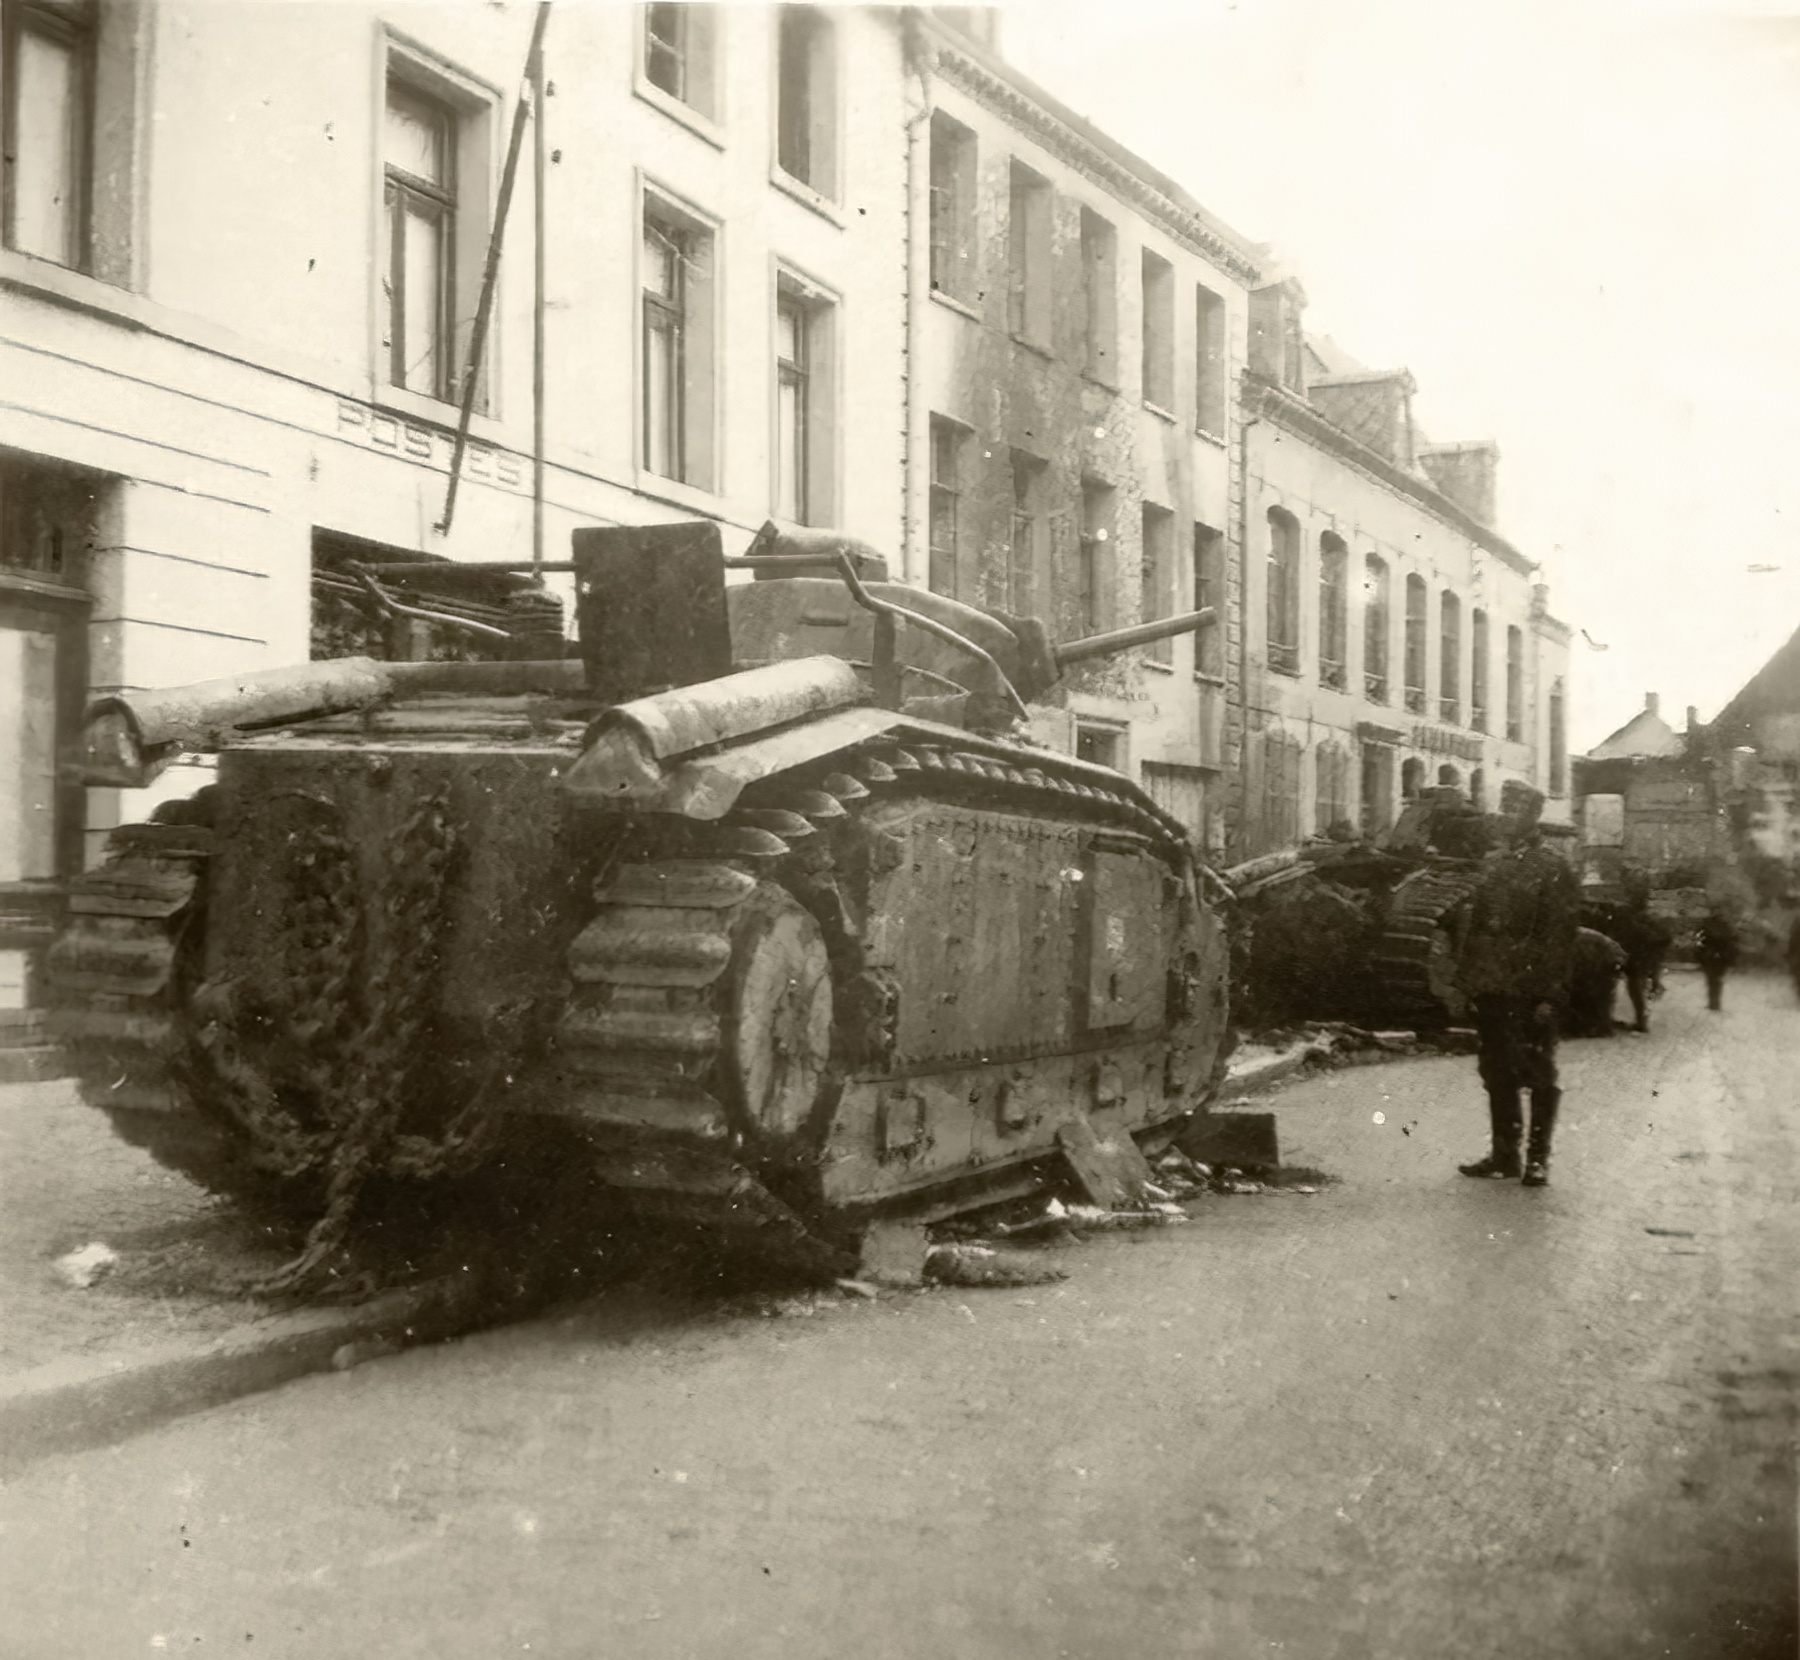 French Army Renault Char B1 captured during the battle of France 1940 ebay 04